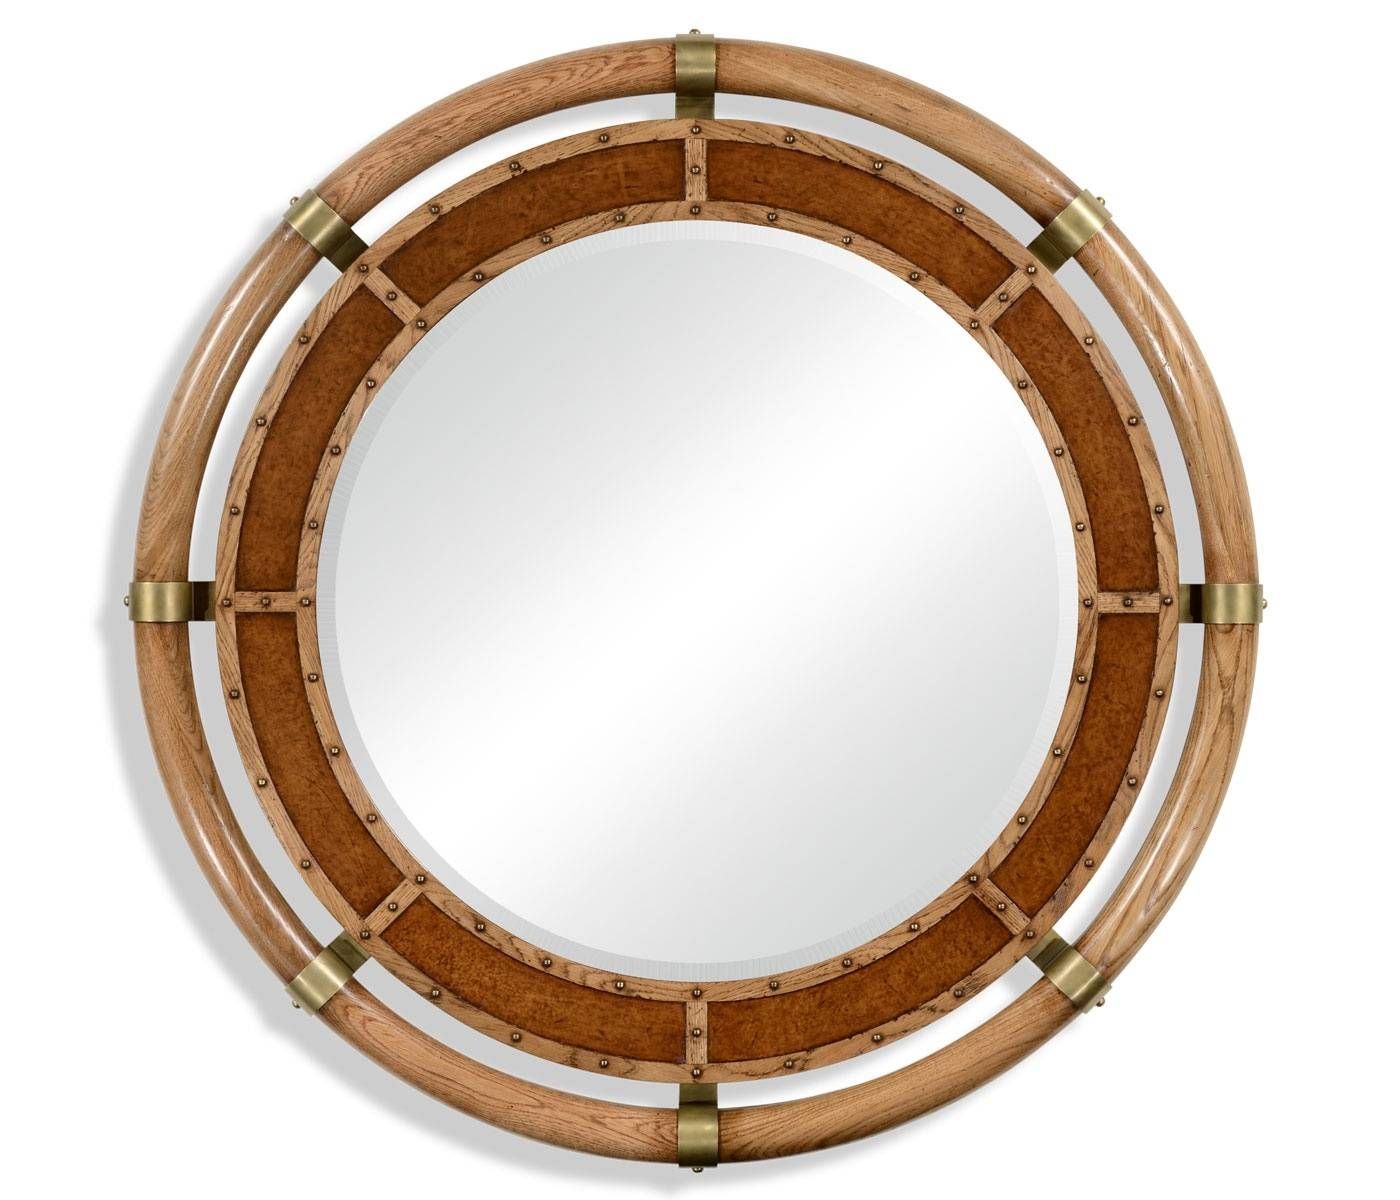 Round Nautical Mirror Images – Reverse Search Intended For Leather Round Mirrors (View 11 of 25)